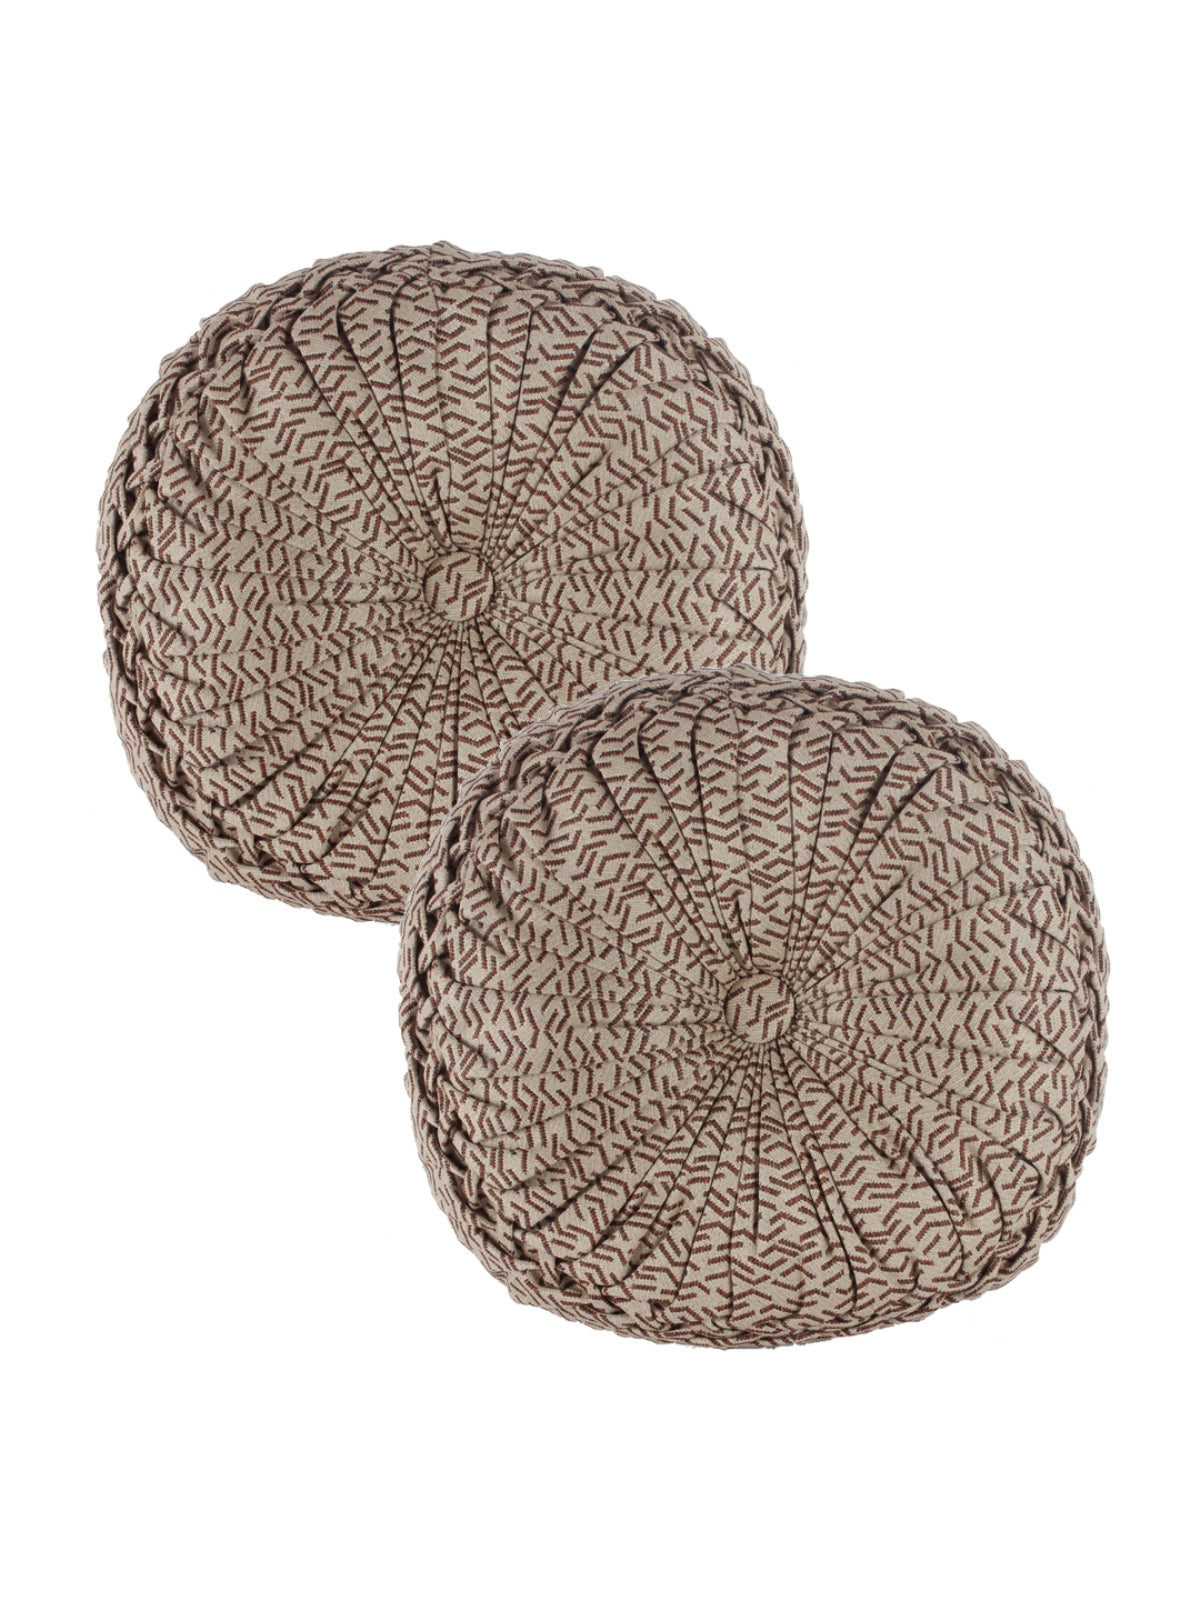 Beige & Brown Set of 2 Geometric Patterned Round Shape Cushions